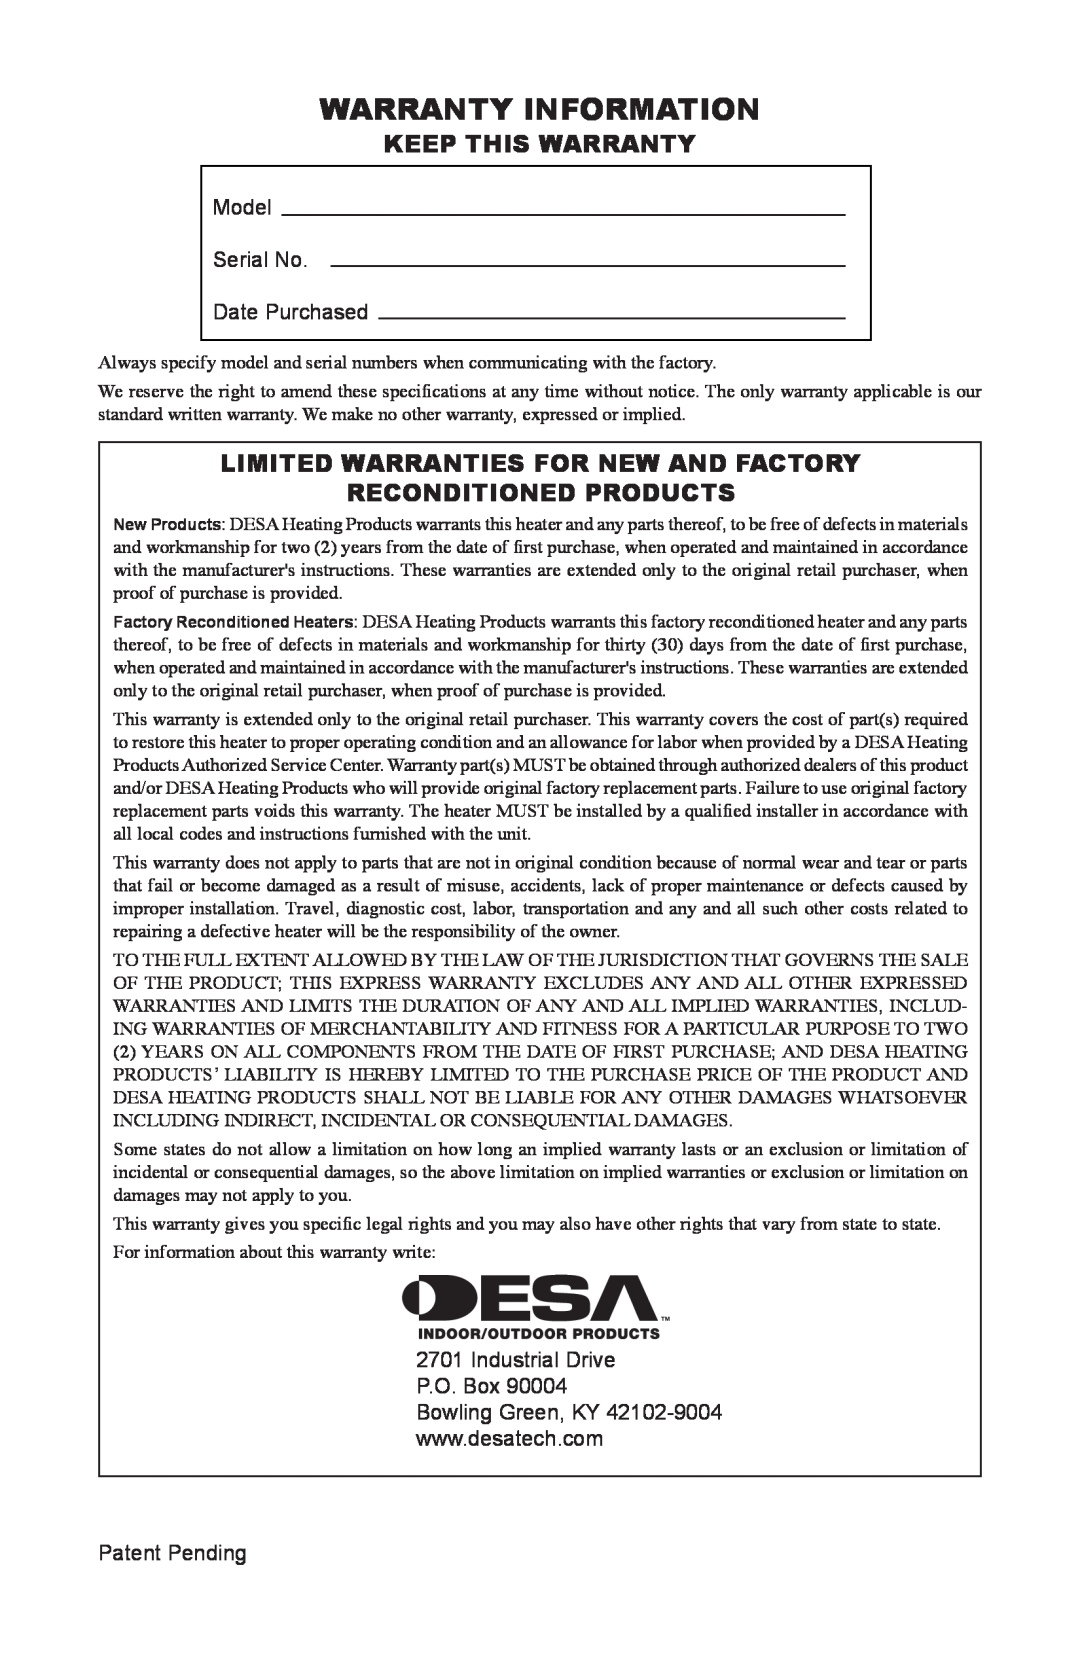 Desa SF20NT Warranty Information, Keep This Warranty, Limited Warranties For New And Factory, Reconditioned Products 